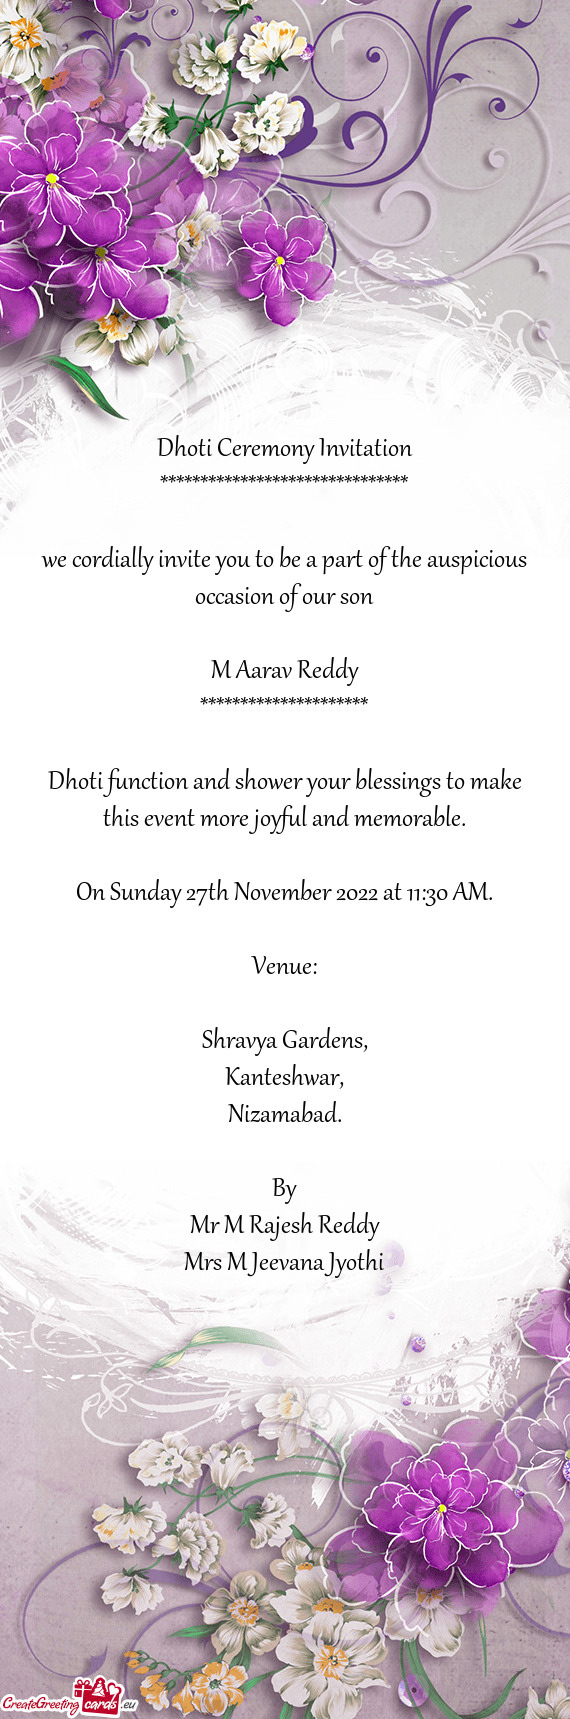 We cordially invite you to be a part of the auspicious occasion of our son